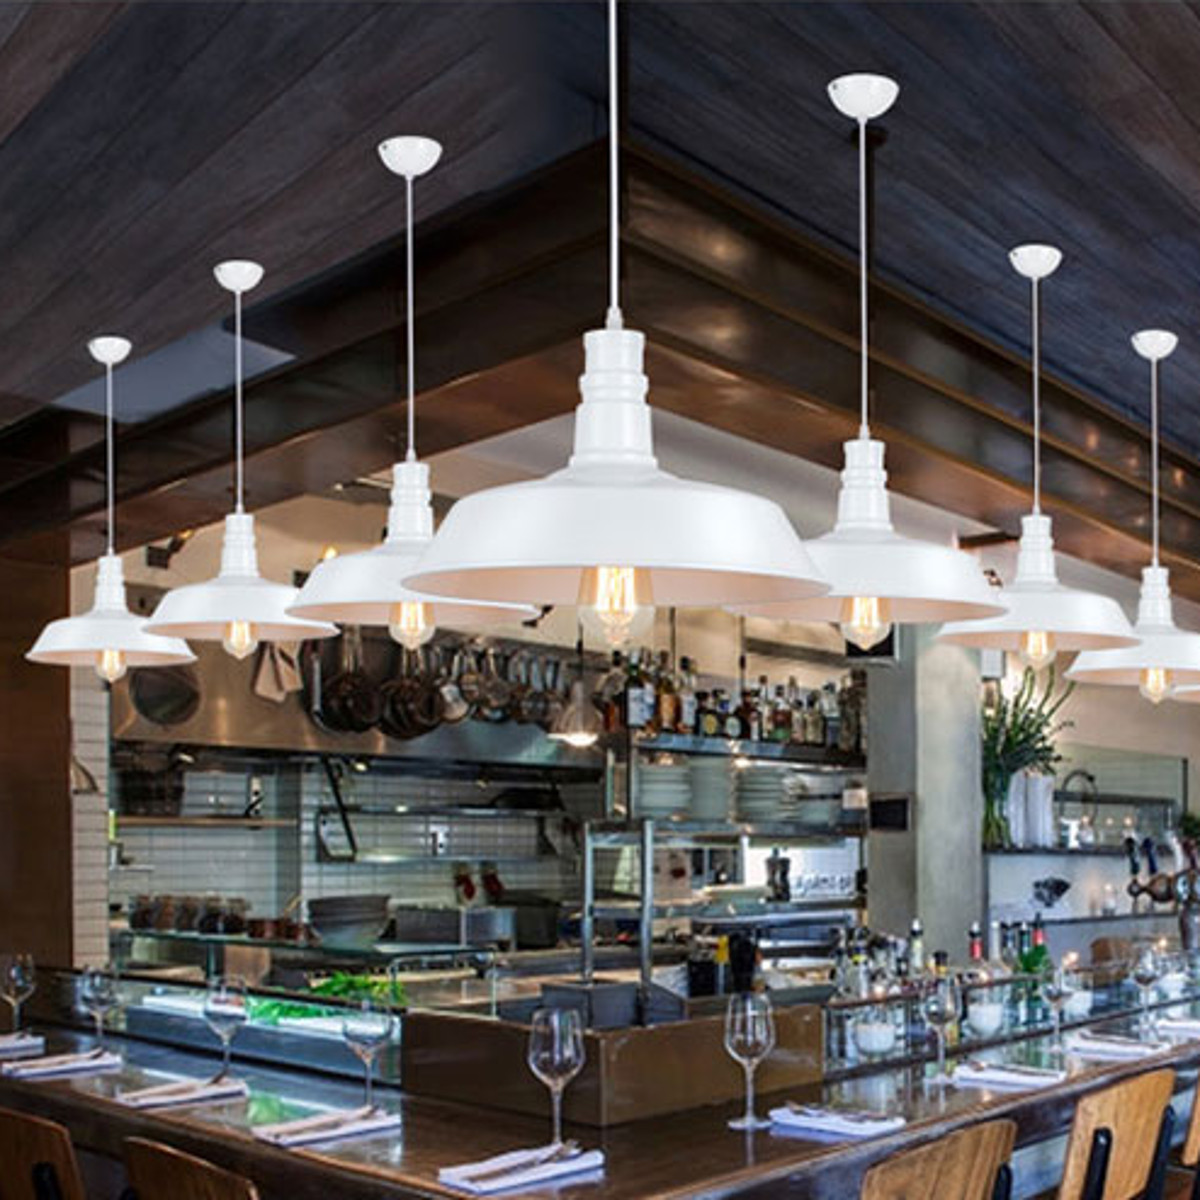 Modern-Industrial-Metal-Style-Ceiling-Pendant-Light-Lamp-Shades-Lampshade-Decor-1349402-4